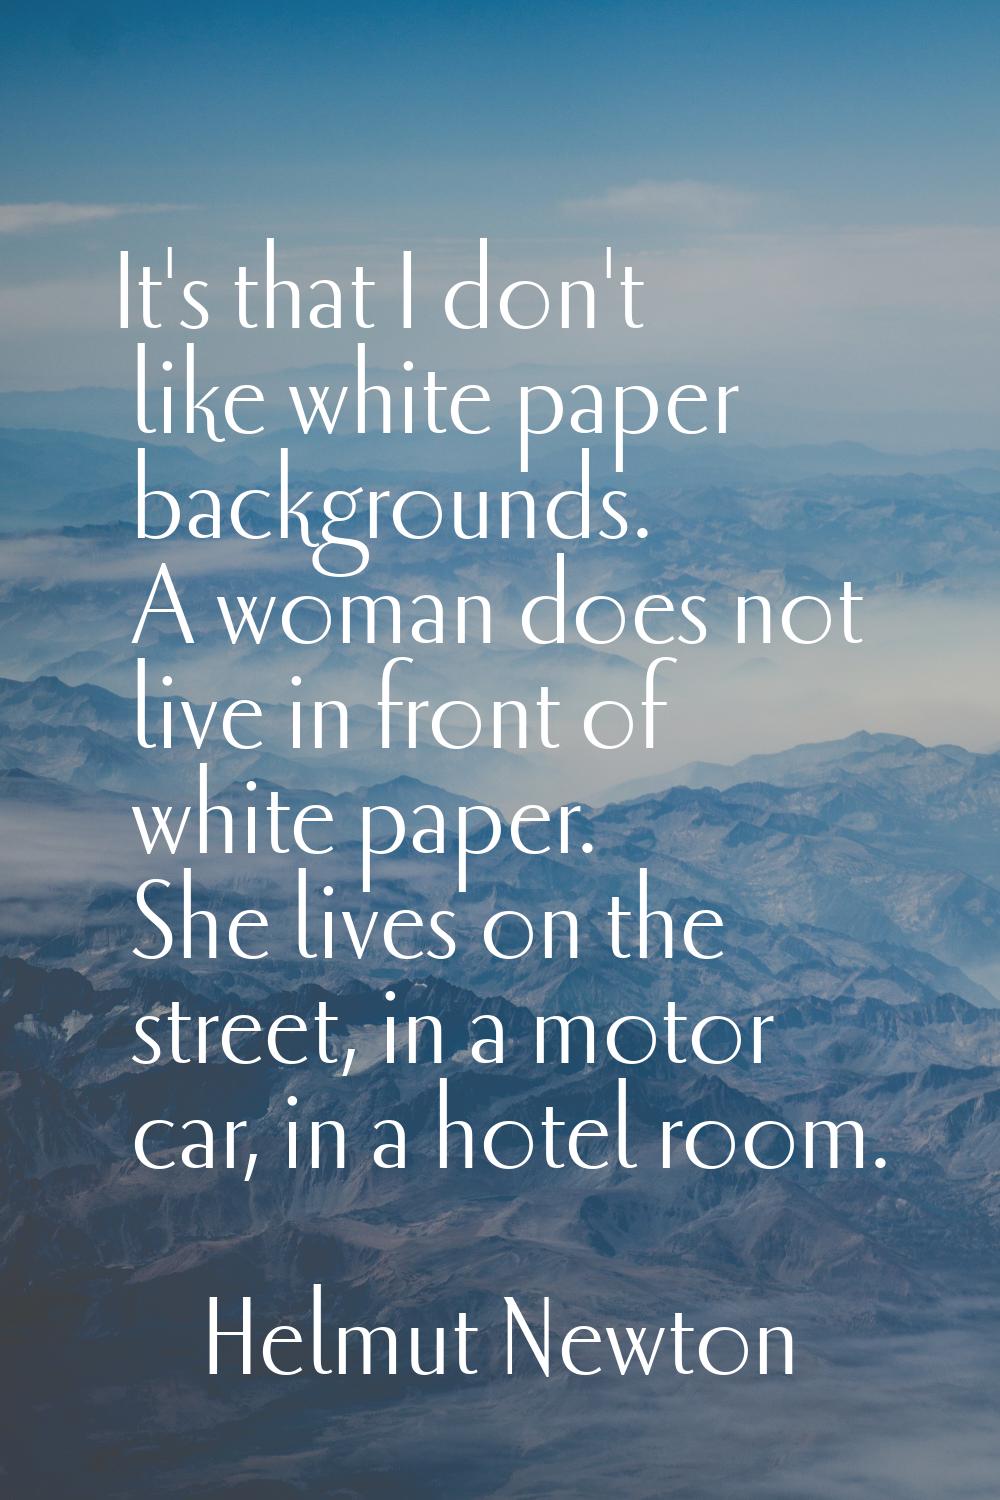 It's that I don't like white paper backgrounds. A woman does not live in front of white paper. She 